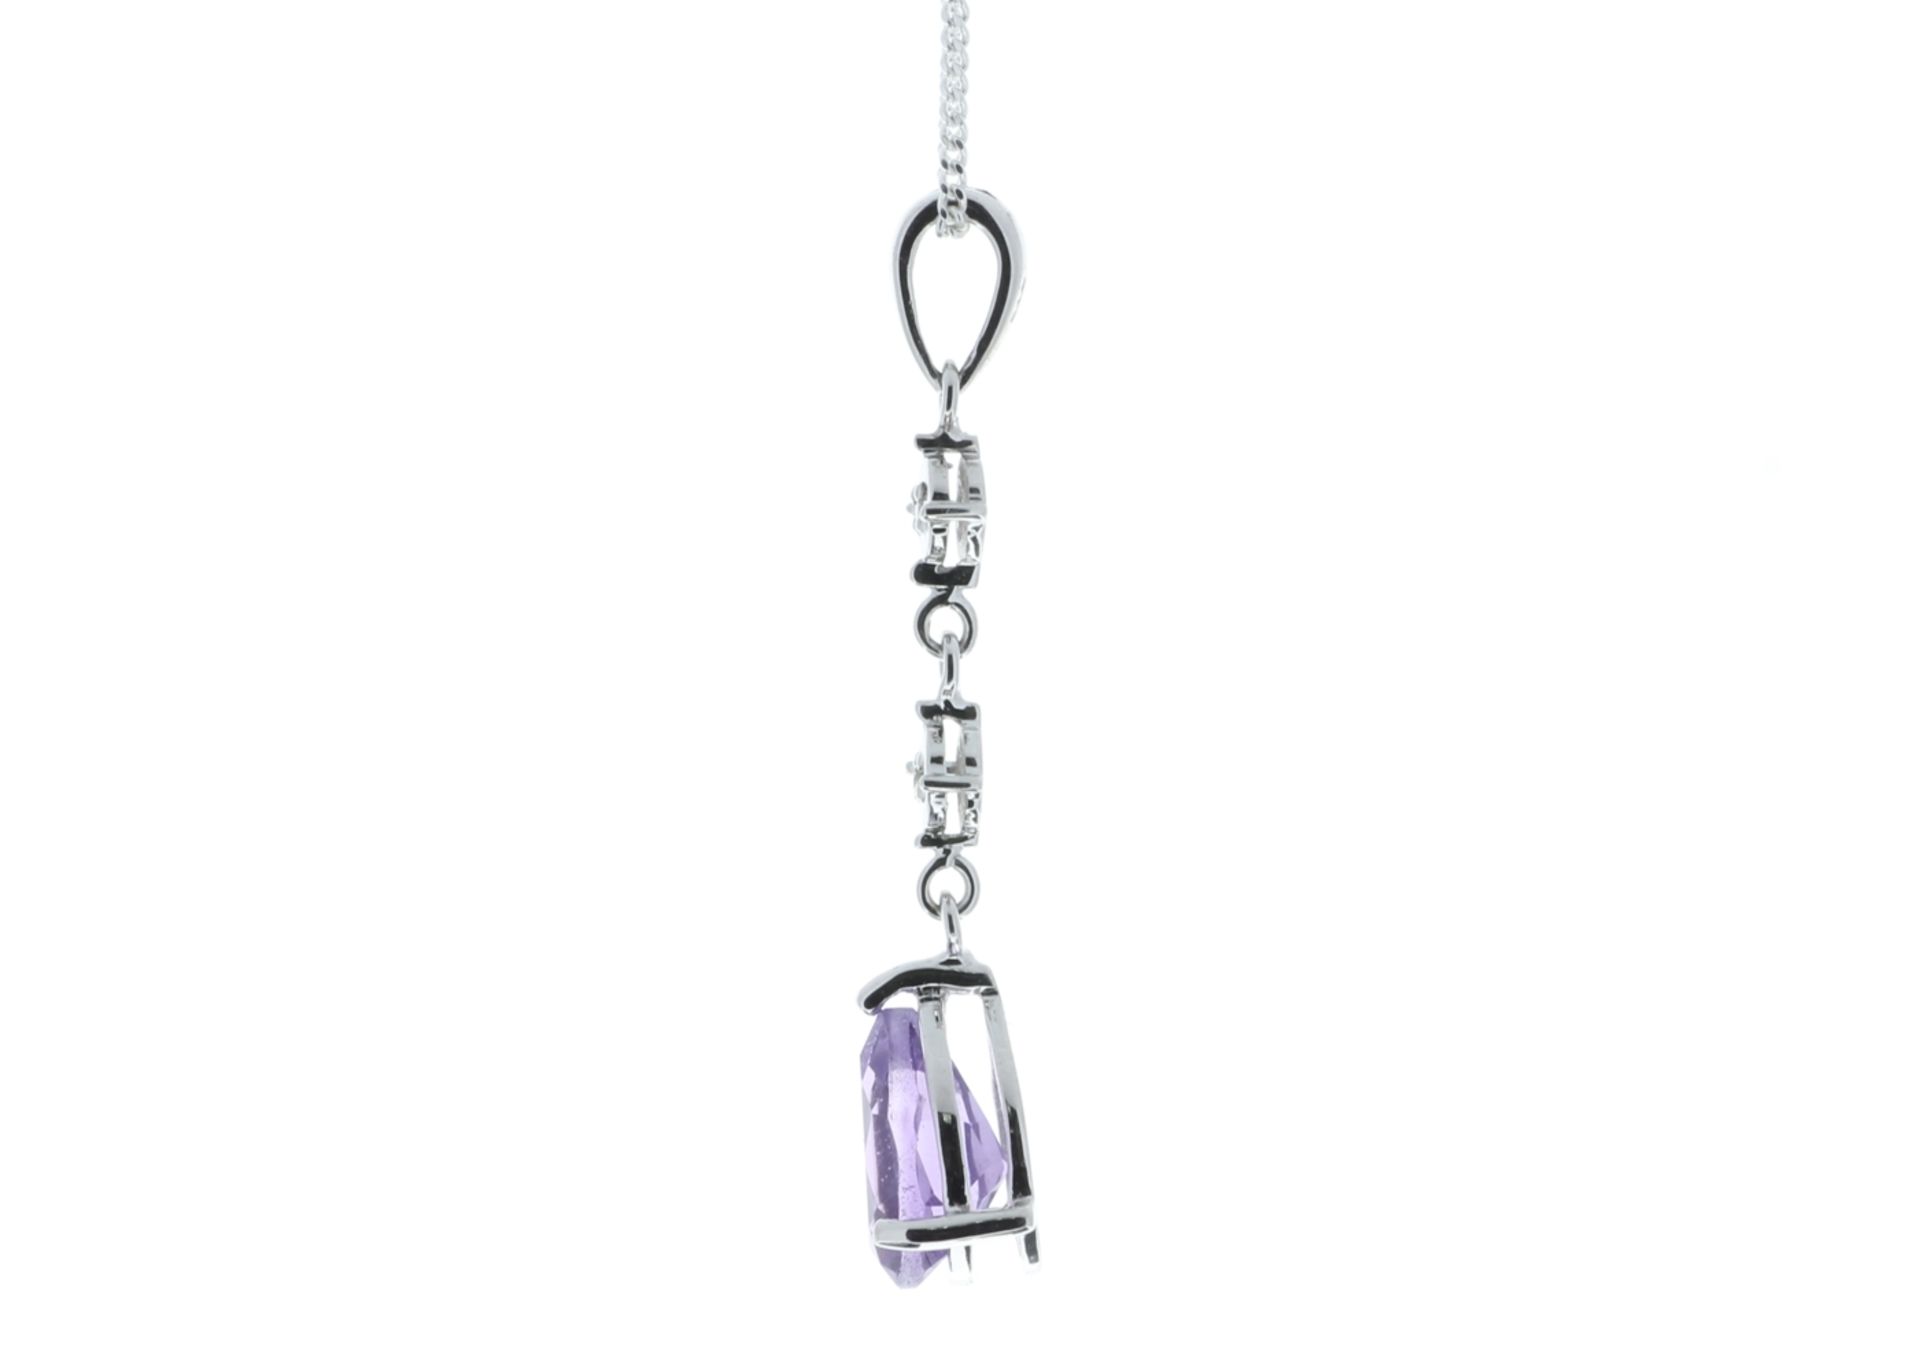 9ct White Gold Amethyst And Diamond Pendant 0.01 Carats - Valued by GIE £560.00 - This is classic - Image 3 of 5